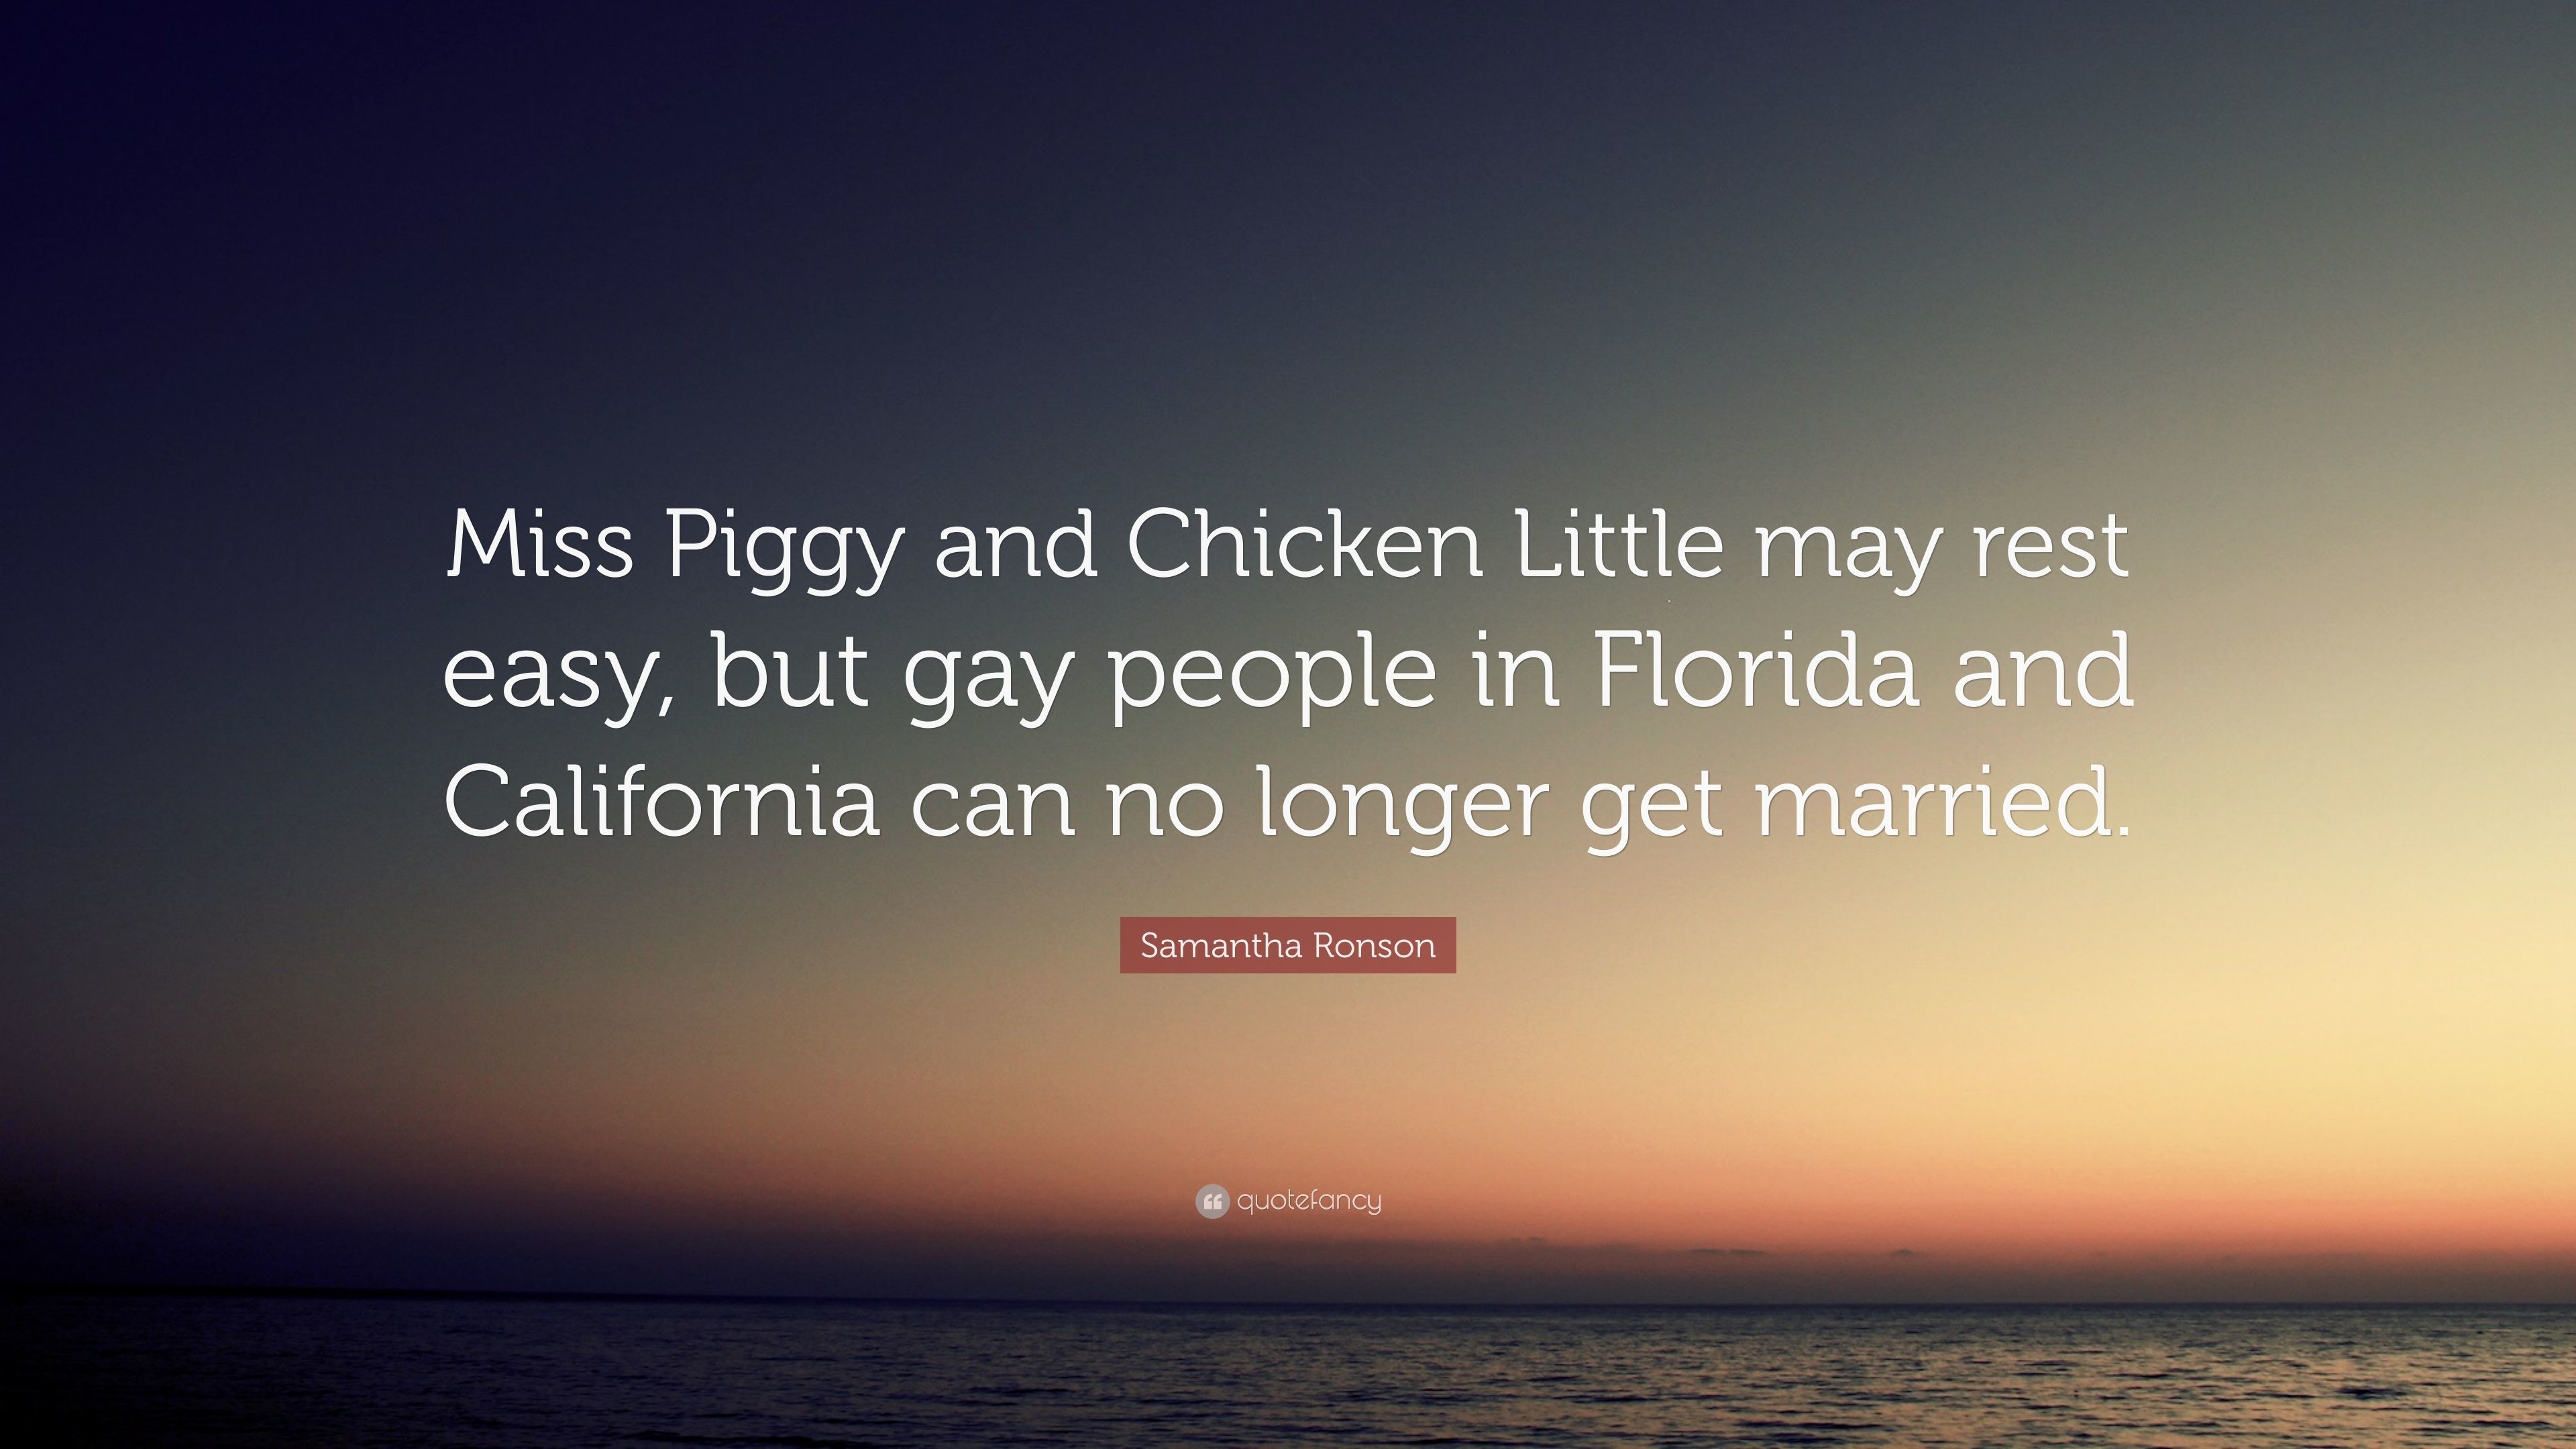 3840x2160 Samantha Ronson Quote: “Miss Piggy and Chicken Little may rest easy, but gay